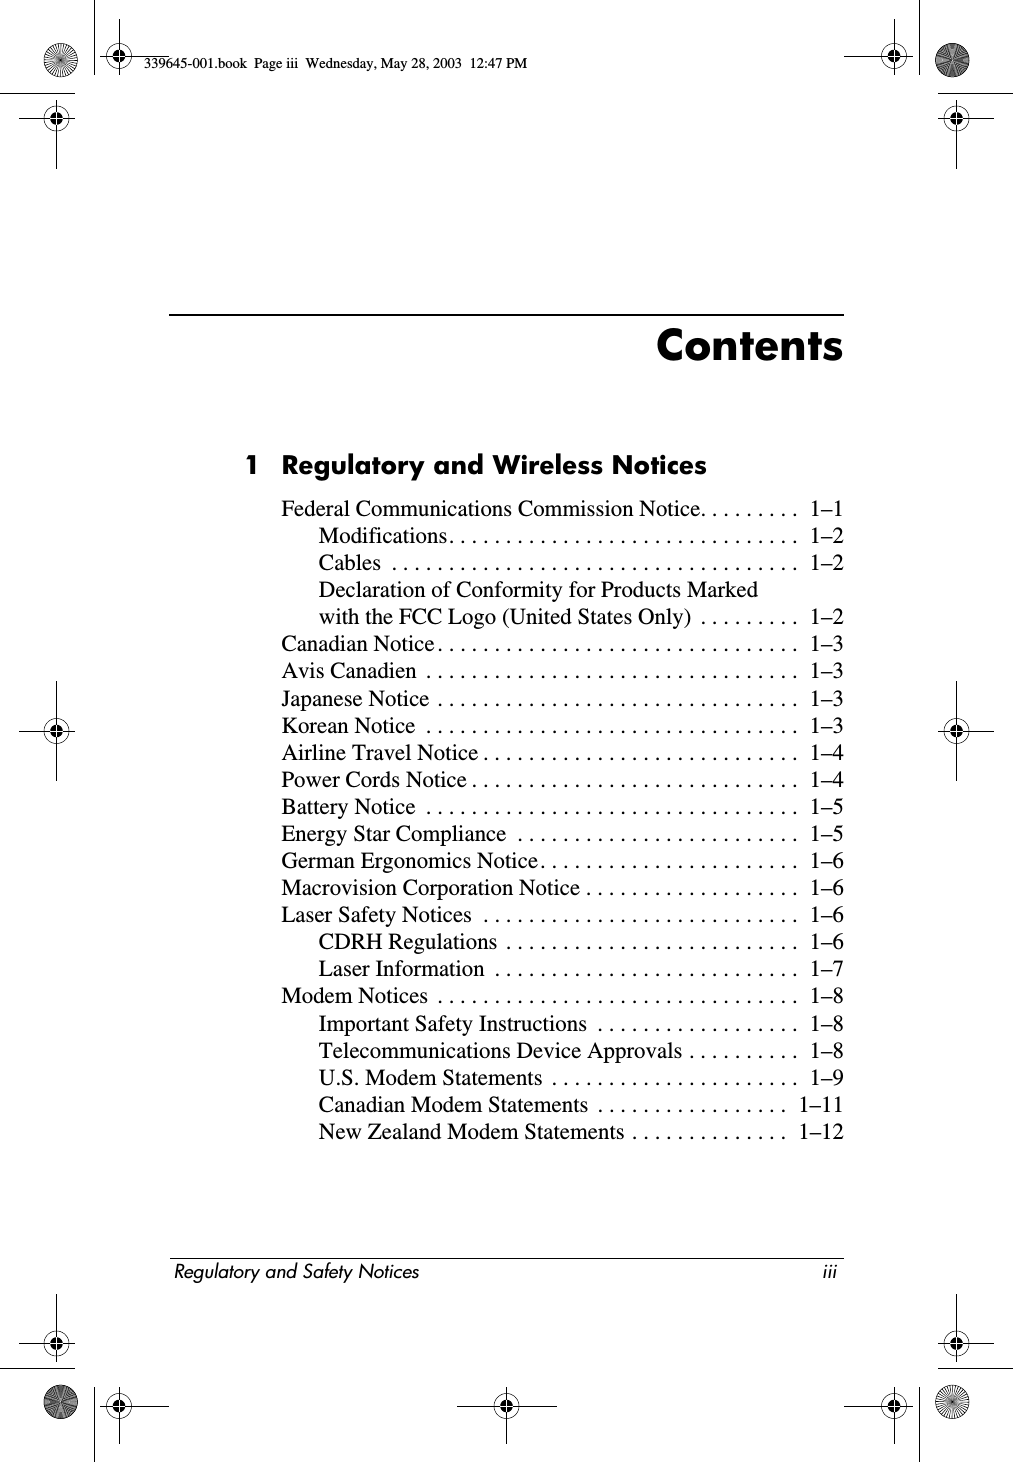 Regulatory and Safety Notices iiiContents1 Regulatory and Wireless NoticesFederal Communications Commission Notice. . . . . . . . .  1–1Modifications. . . . . . . . . . . . . . . . . . . . . . . . . . . . . . .  1–2Cables  . . . . . . . . . . . . . . . . . . . . . . . . . . . . . . . . . . . .  1–2Declaration of Conformity for Products Markedwith the FCC Logo (United States Only)  . . . . . . . . .  1–2Canadian Notice . . . . . . . . . . . . . . . . . . . . . . . . . . . . . . . .  1–3Avis Canadien  . . . . . . . . . . . . . . . . . . . . . . . . . . . . . . . . .  1–3Japanese Notice . . . . . . . . . . . . . . . . . . . . . . . . . . . . . . . .  1–3Korean Notice  . . . . . . . . . . . . . . . . . . . . . . . . . . . . . . . . .  1–3Airline Travel Notice . . . . . . . . . . . . . . . . . . . . . . . . . . . .  1–4Power Cords Notice . . . . . . . . . . . . . . . . . . . . . . . . . . . . .  1–4Battery Notice  . . . . . . . . . . . . . . . . . . . . . . . . . . . . . . . . .  1–5Energy Star Compliance  . . . . . . . . . . . . . . . . . . . . . . . . .  1–5German Ergonomics Notice. . . . . . . . . . . . . . . . . . . . . . .  1–6Macrovision Corporation Notice . . . . . . . . . . . . . . . . . . .  1–6Laser Safety Notices  . . . . . . . . . . . . . . . . . . . . . . . . . . . .  1–6CDRH Regulations  . . . . . . . . . . . . . . . . . . . . . . . . . .  1–6Laser Information  . . . . . . . . . . . . . . . . . . . . . . . . . . .  1–7Modem Notices  . . . . . . . . . . . . . . . . . . . . . . . . . . . . . . . .  1–8Important Safety Instructions  . . . . . . . . . . . . . . . . . .  1–8Telecommunications Device Approvals . . . . . . . . . .  1–8U.S. Modem Statements  . . . . . . . . . . . . . . . . . . . . . .  1–9Canadian Modem Statements  . . . . . . . . . . . . . . . . .  1–11New Zealand Modem Statements . . . . . . . . . . . . . .  1–12339645-001.book  Page iii  Wednesday, May 28, 2003  12:47 PM